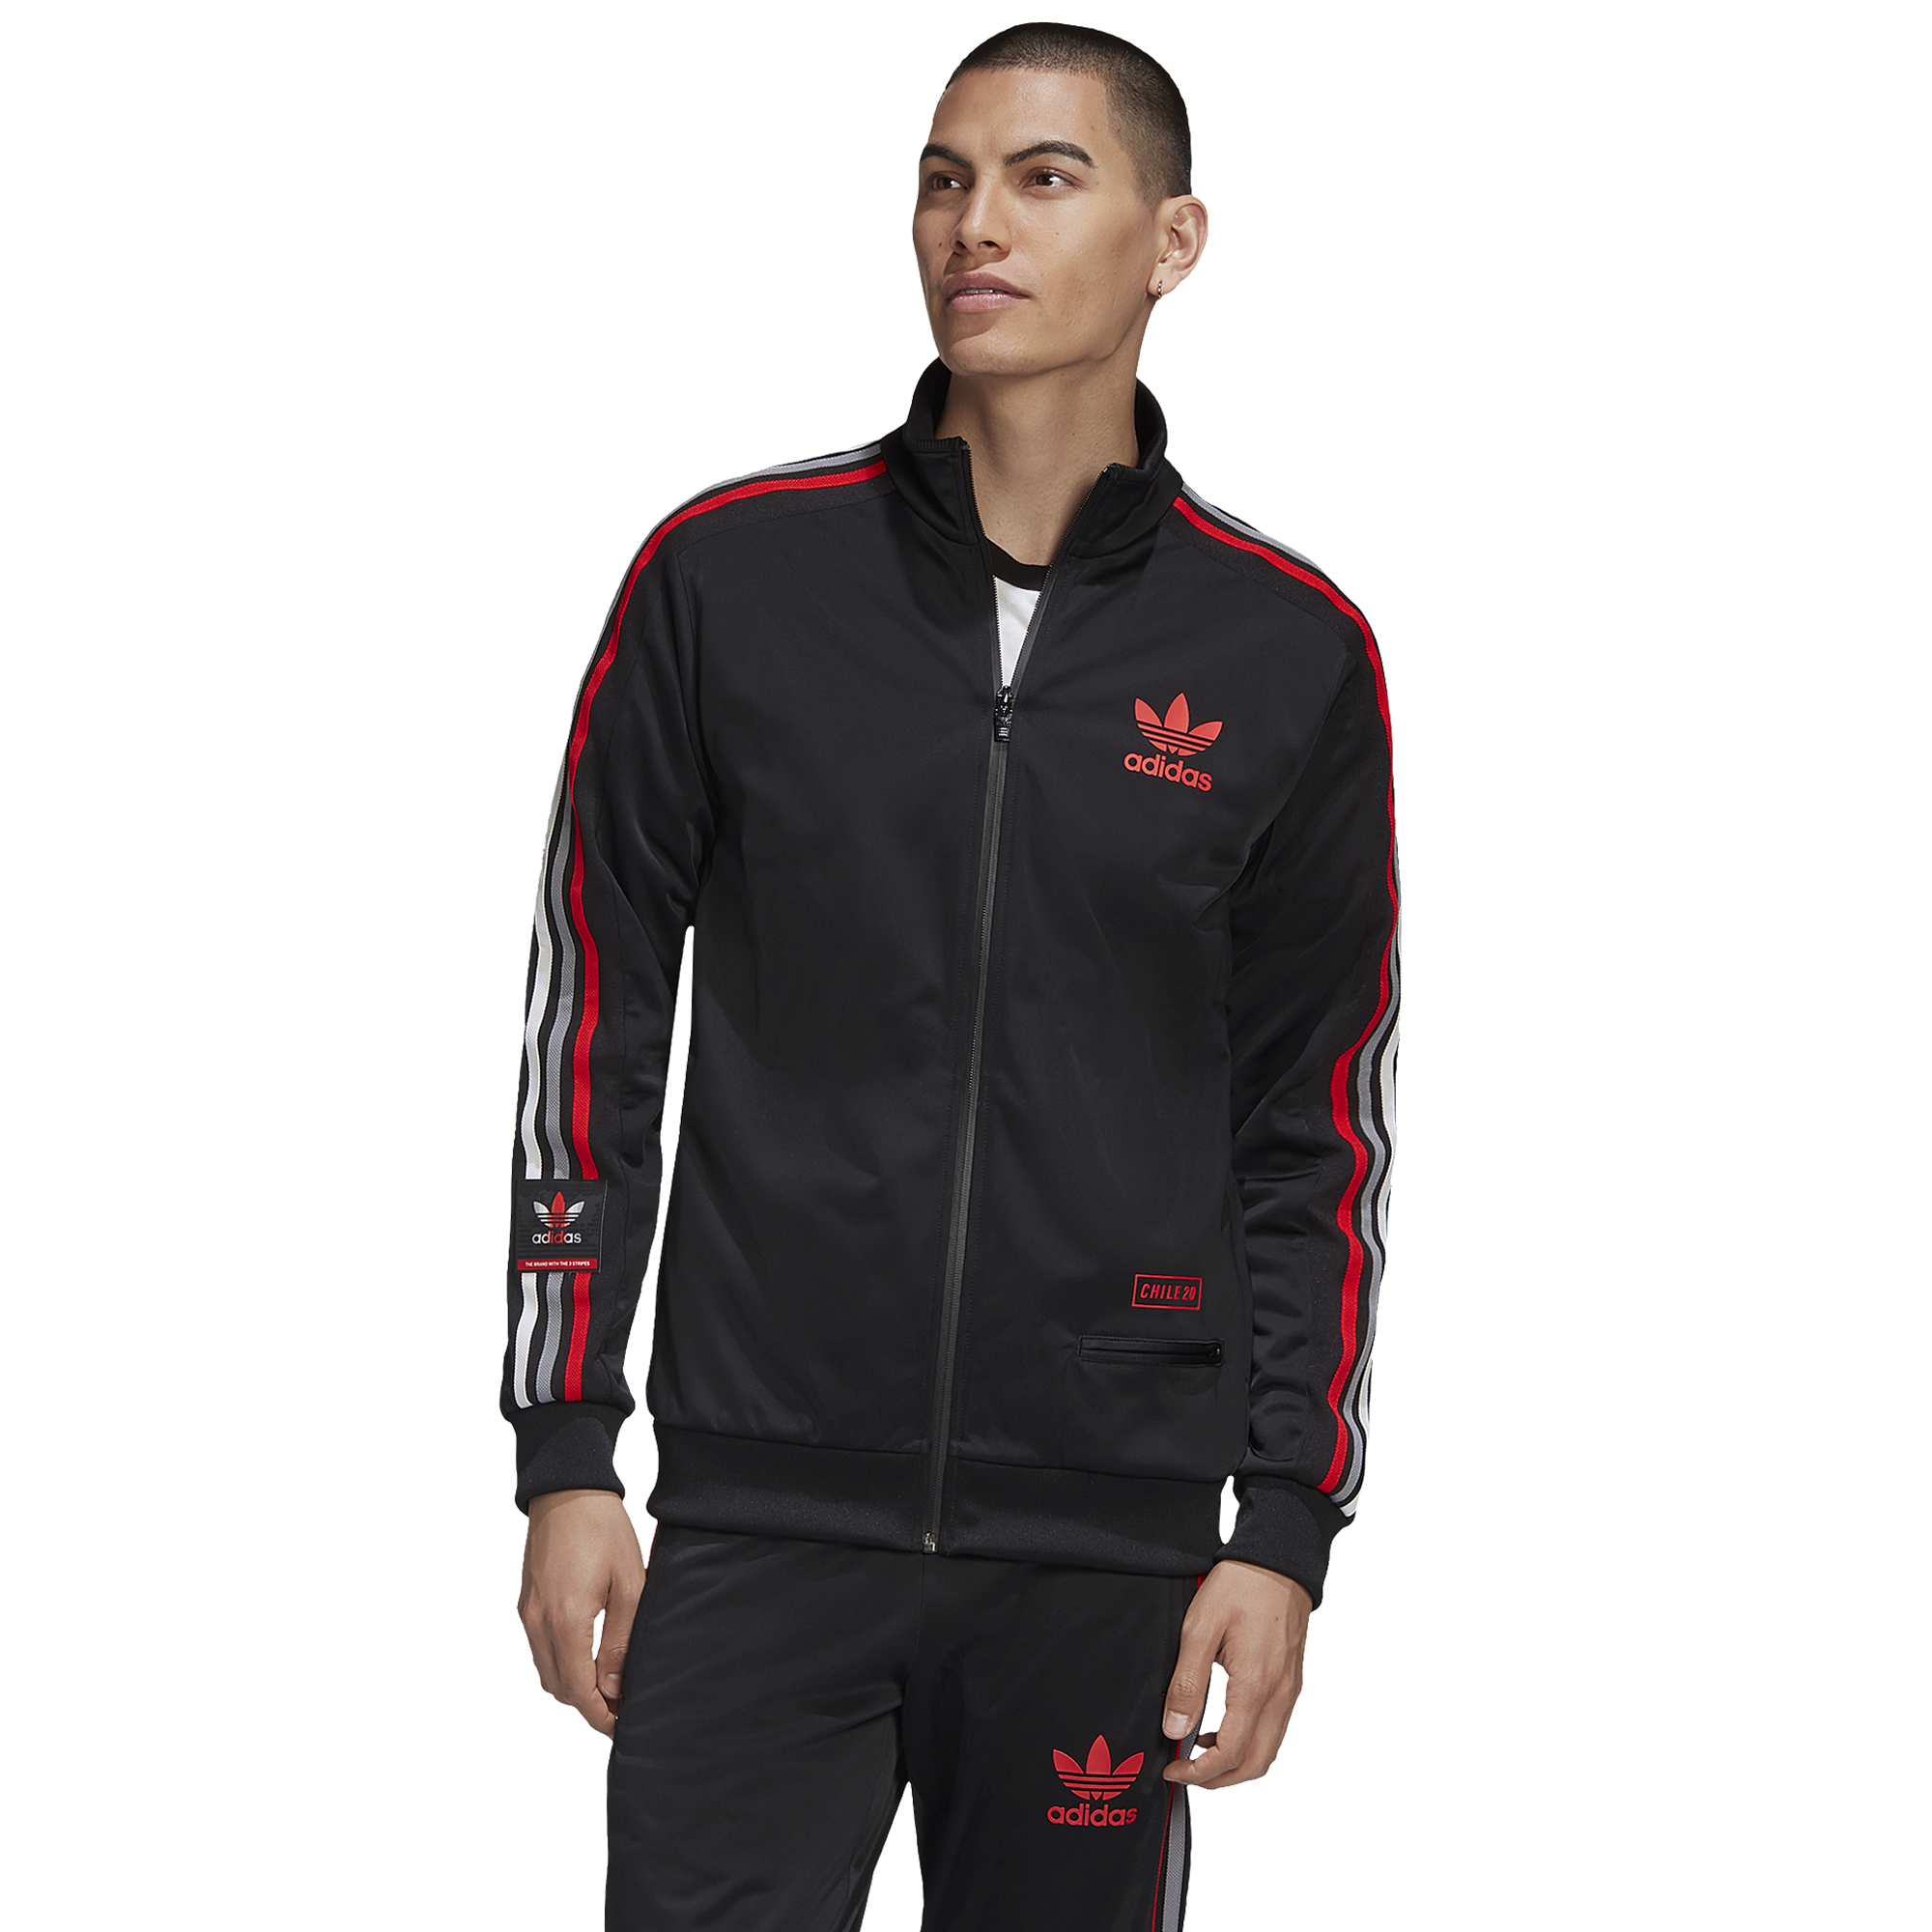 adidas jacket blue and red